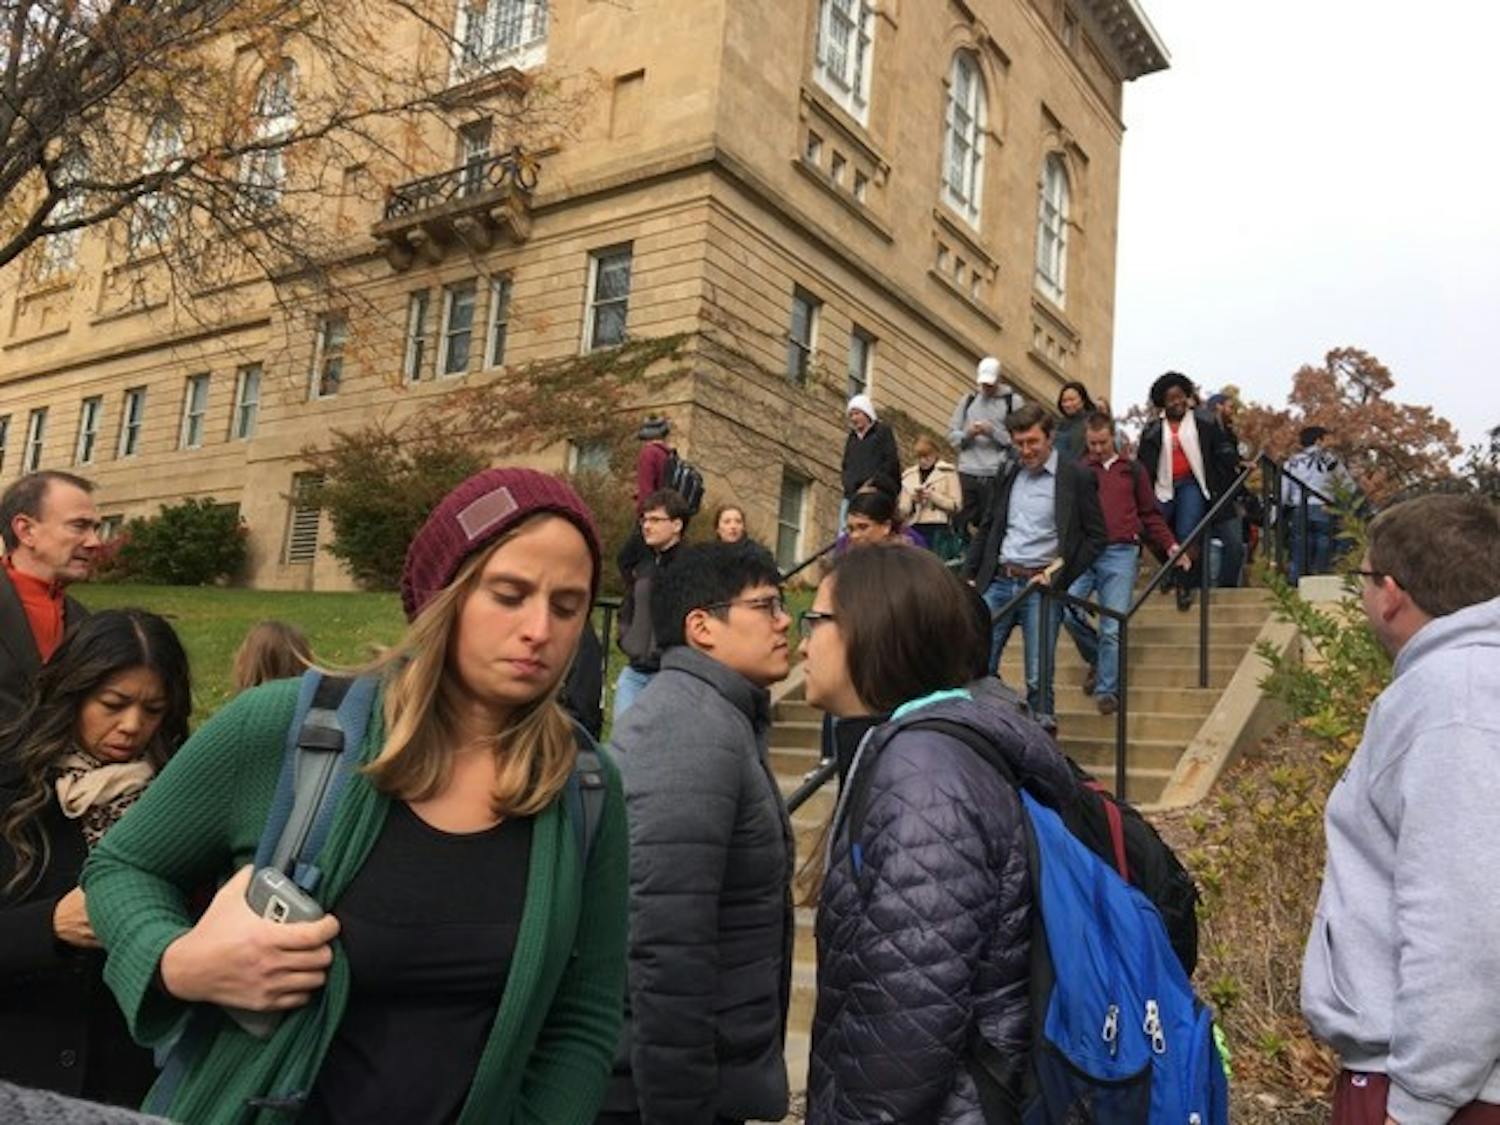 Students hurry away from Bascom after a man with a gun was reported at the Law Library.